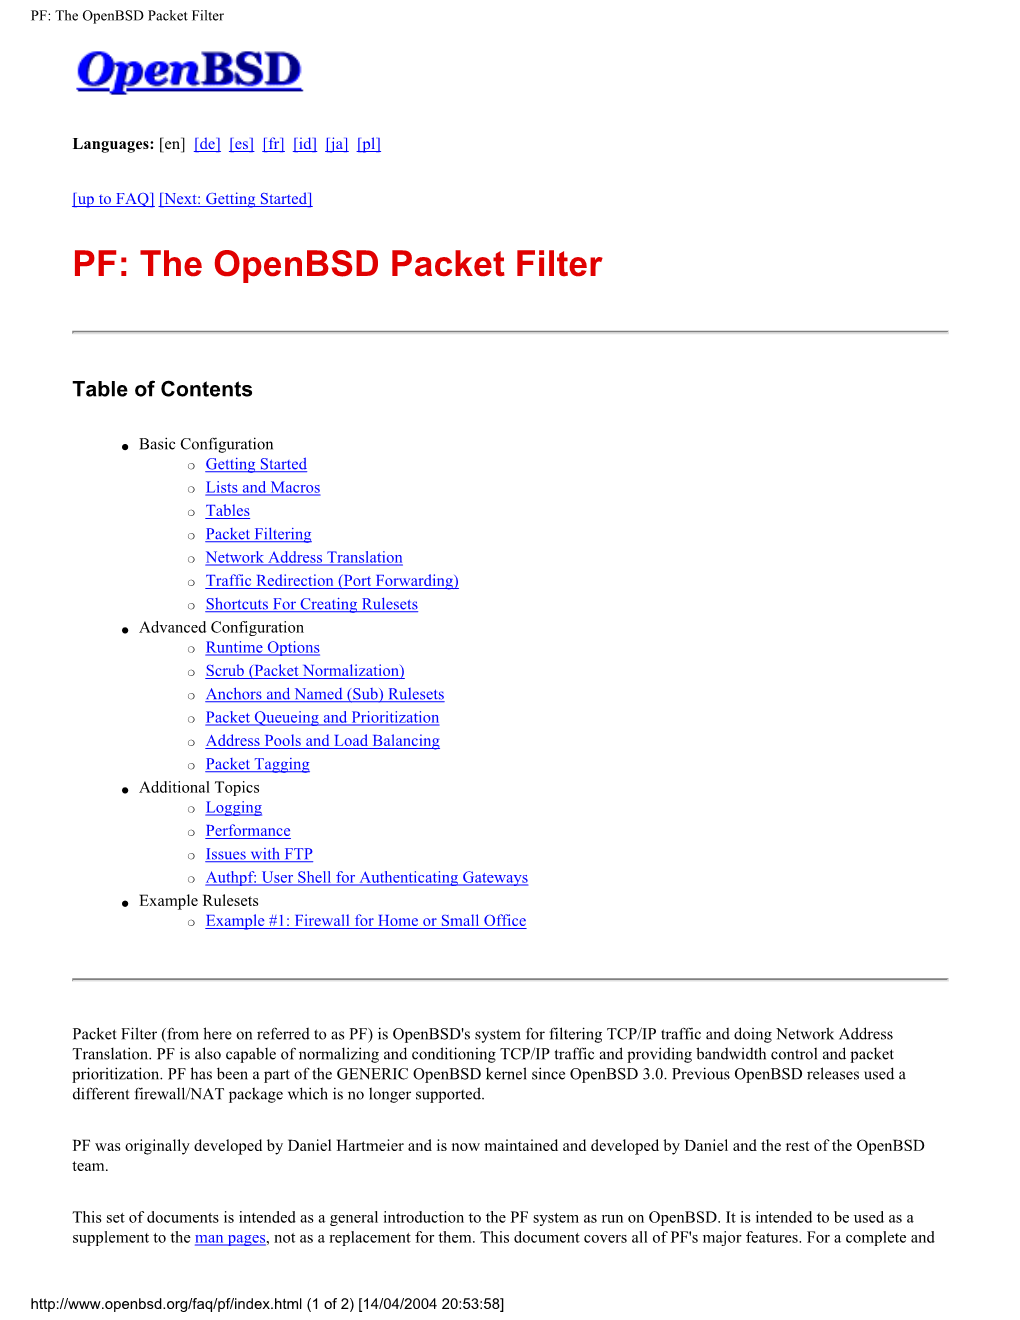 PF: the Openbsd Packet Filter